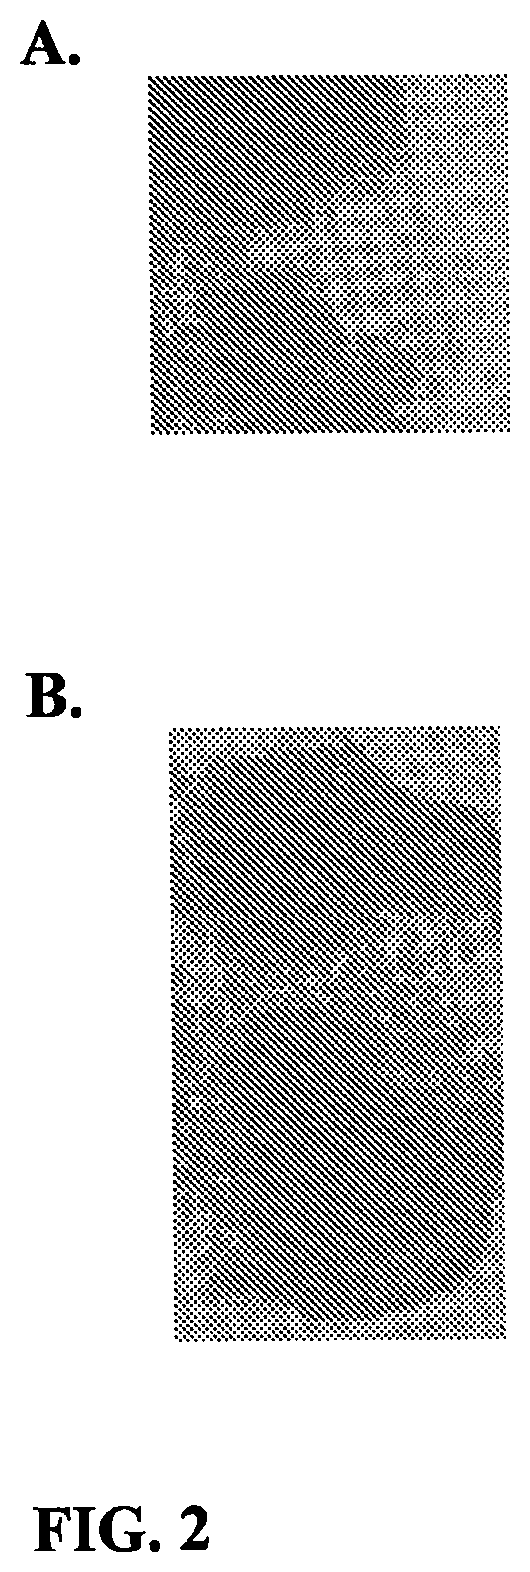 Method to improve safety and efficacy of anti-cancer therapy